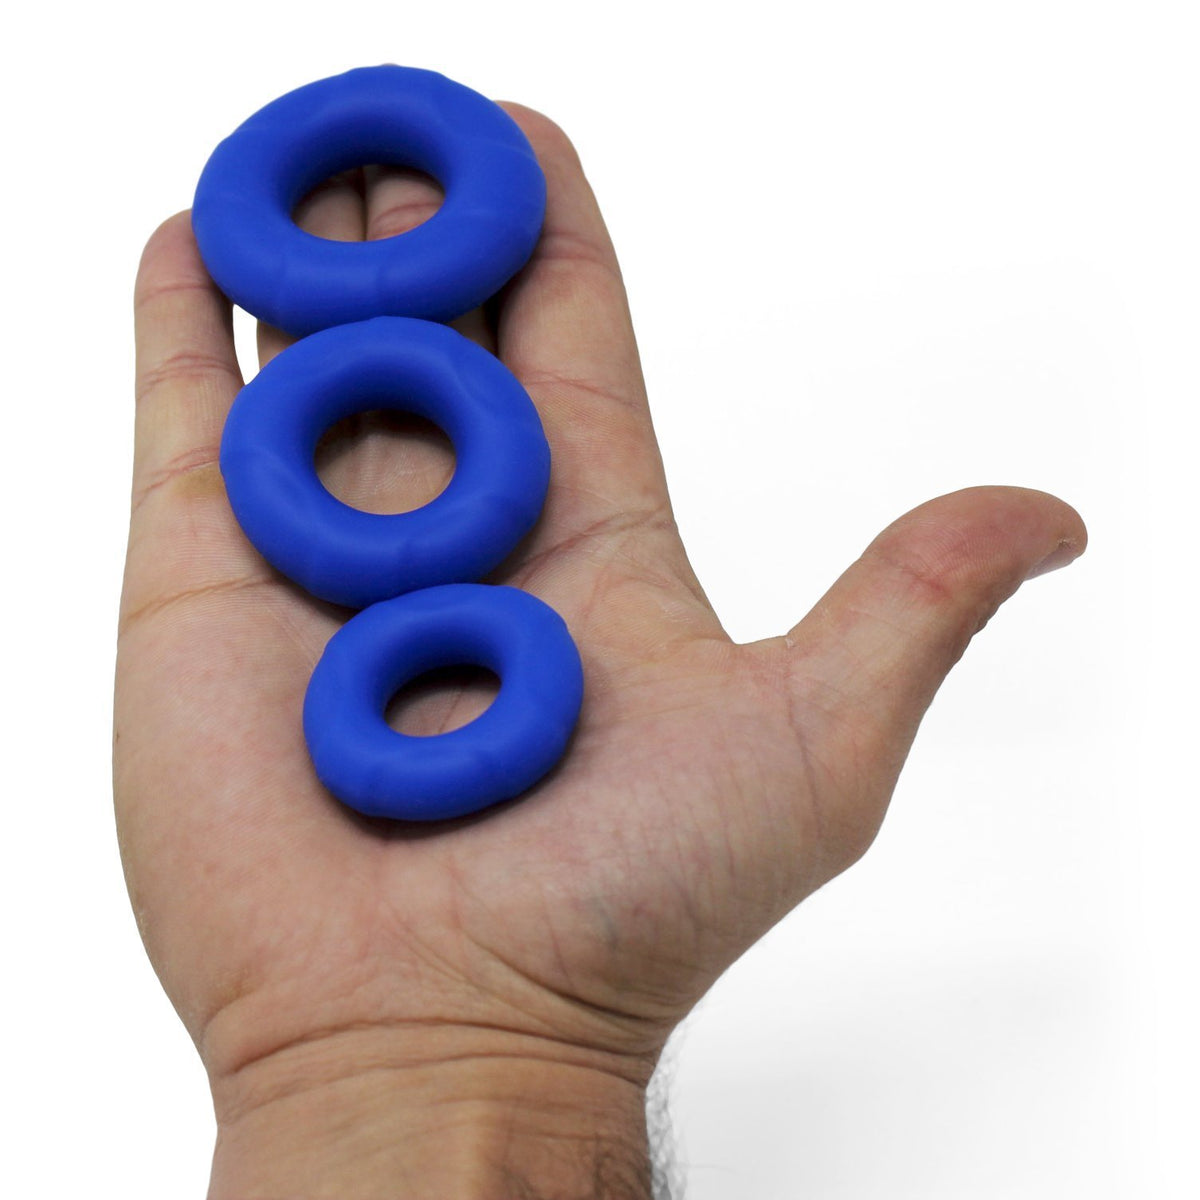 Lynk Pleasure Loop XL Silicone Cock Ring Kit and Ball Stretching Set for Men Cock Rings